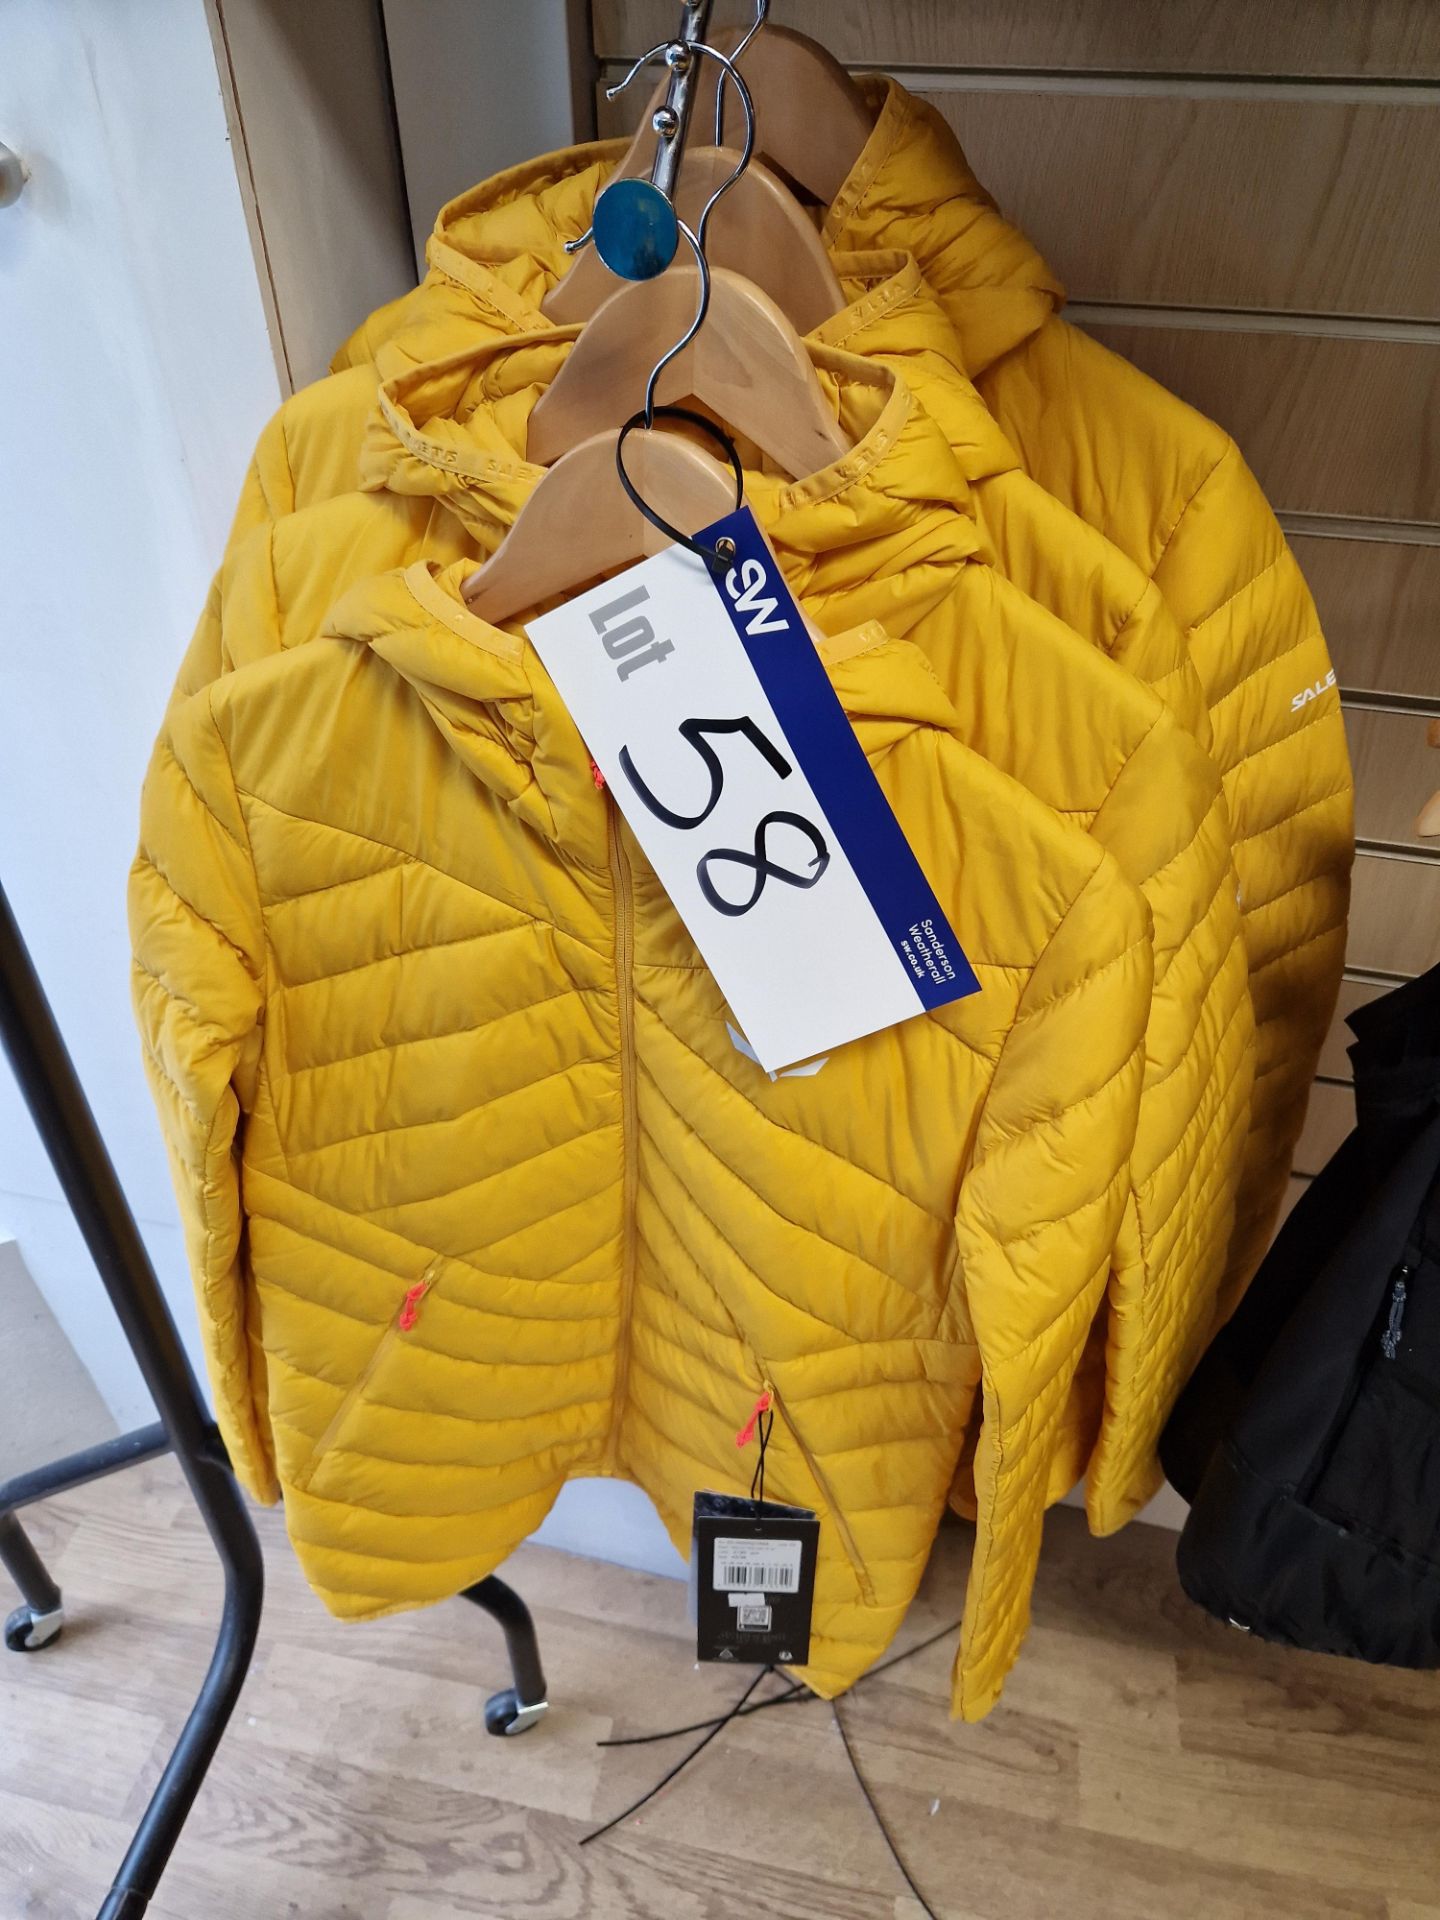 Four Salewa Brenta RDS DWN W Jackets, Colour: Gold, Size: 42/36 to 48/42 Please read the following